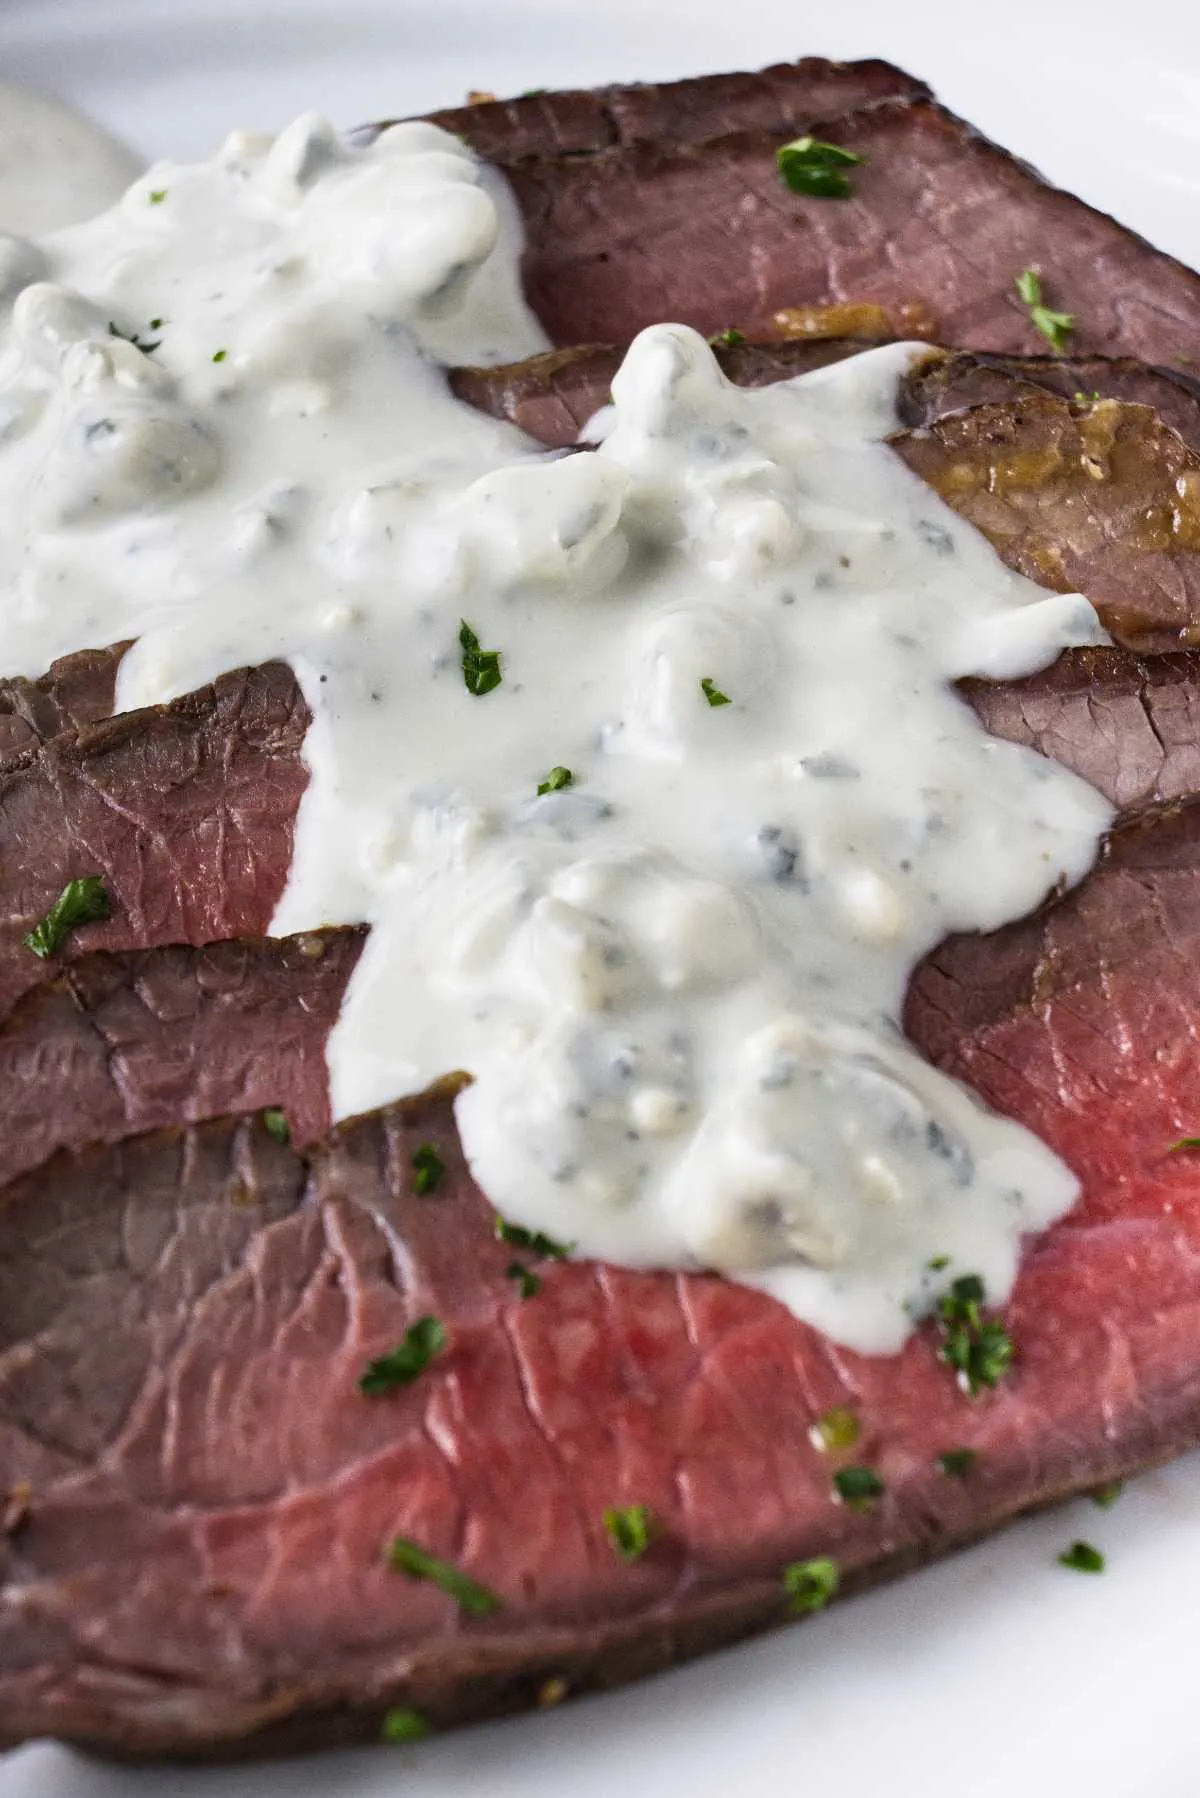 Slices of steak covered in blue cheese sauce.